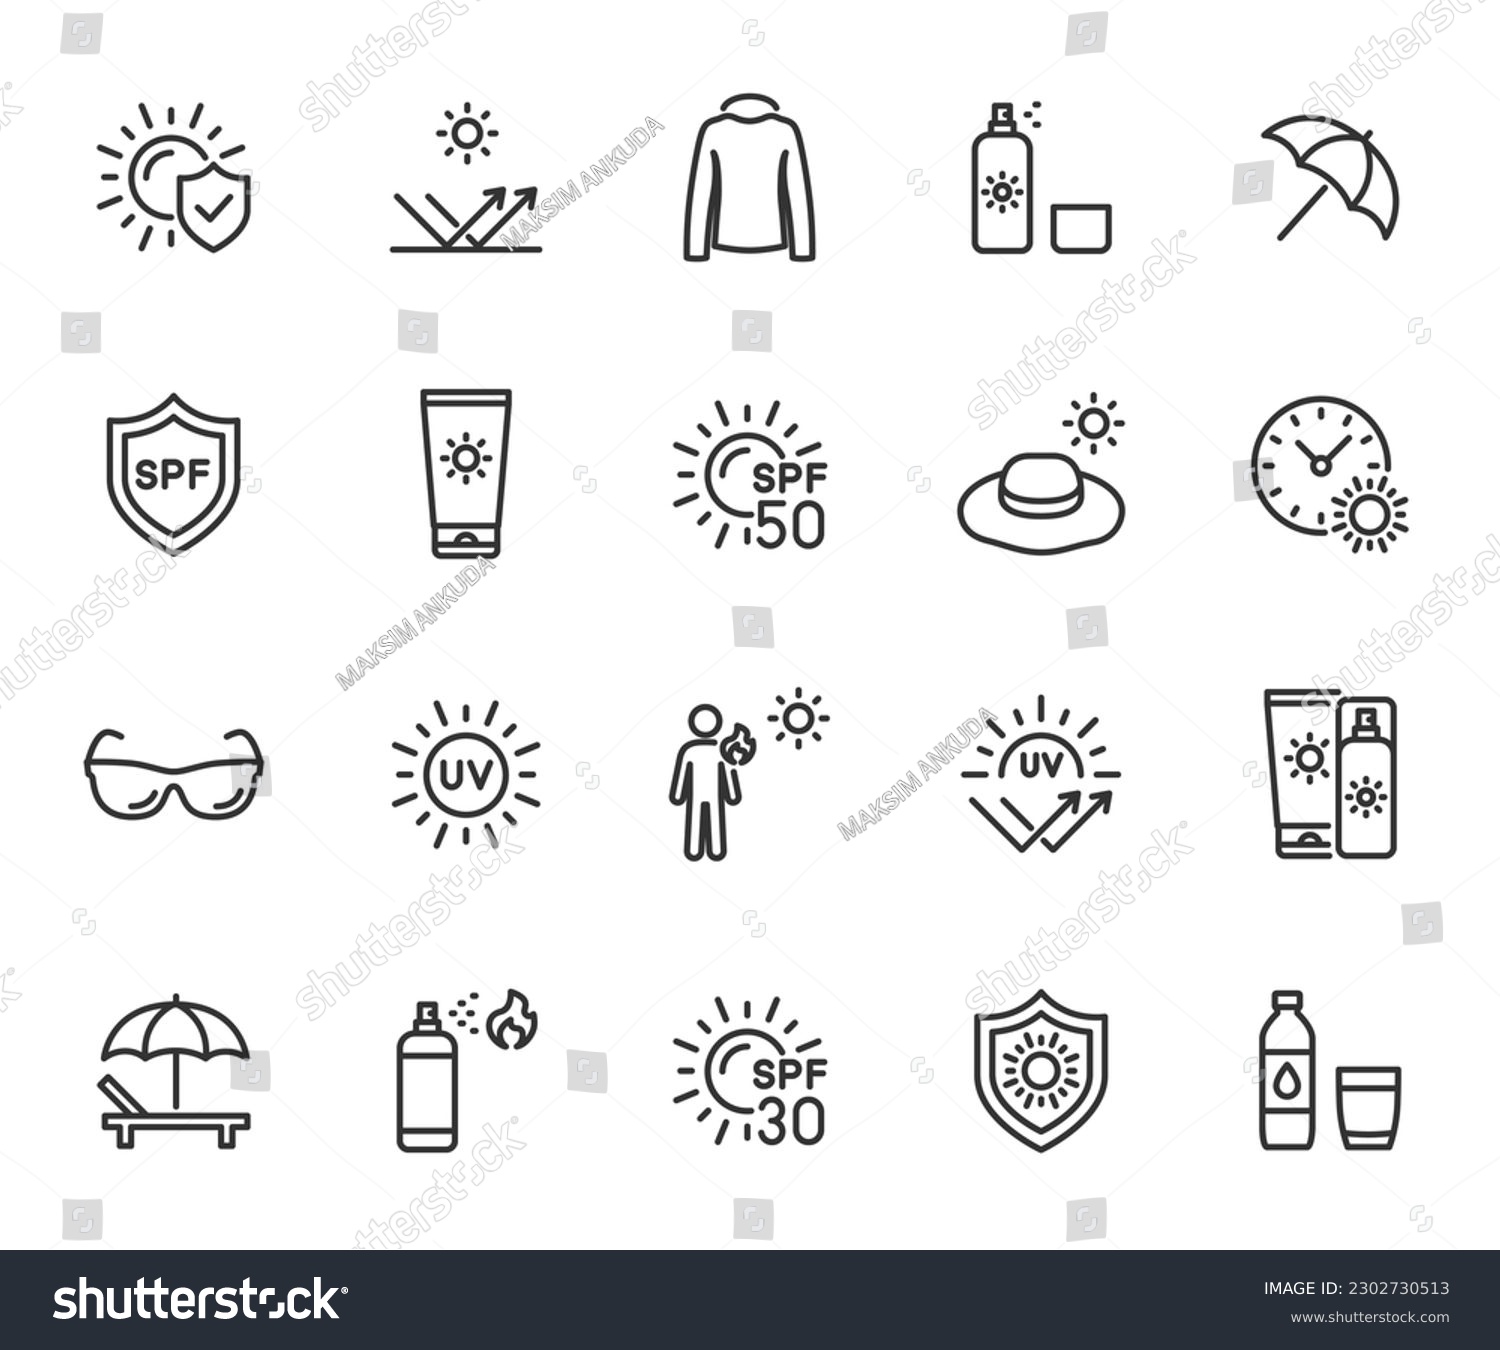 Vector set of sun protection line icons. Contains icons sunscreen, ultraviolet, sunglasses, spf protection, umbrella, sunburn, sun hat, beach lounger and more. Pixel perfect. #2302730513